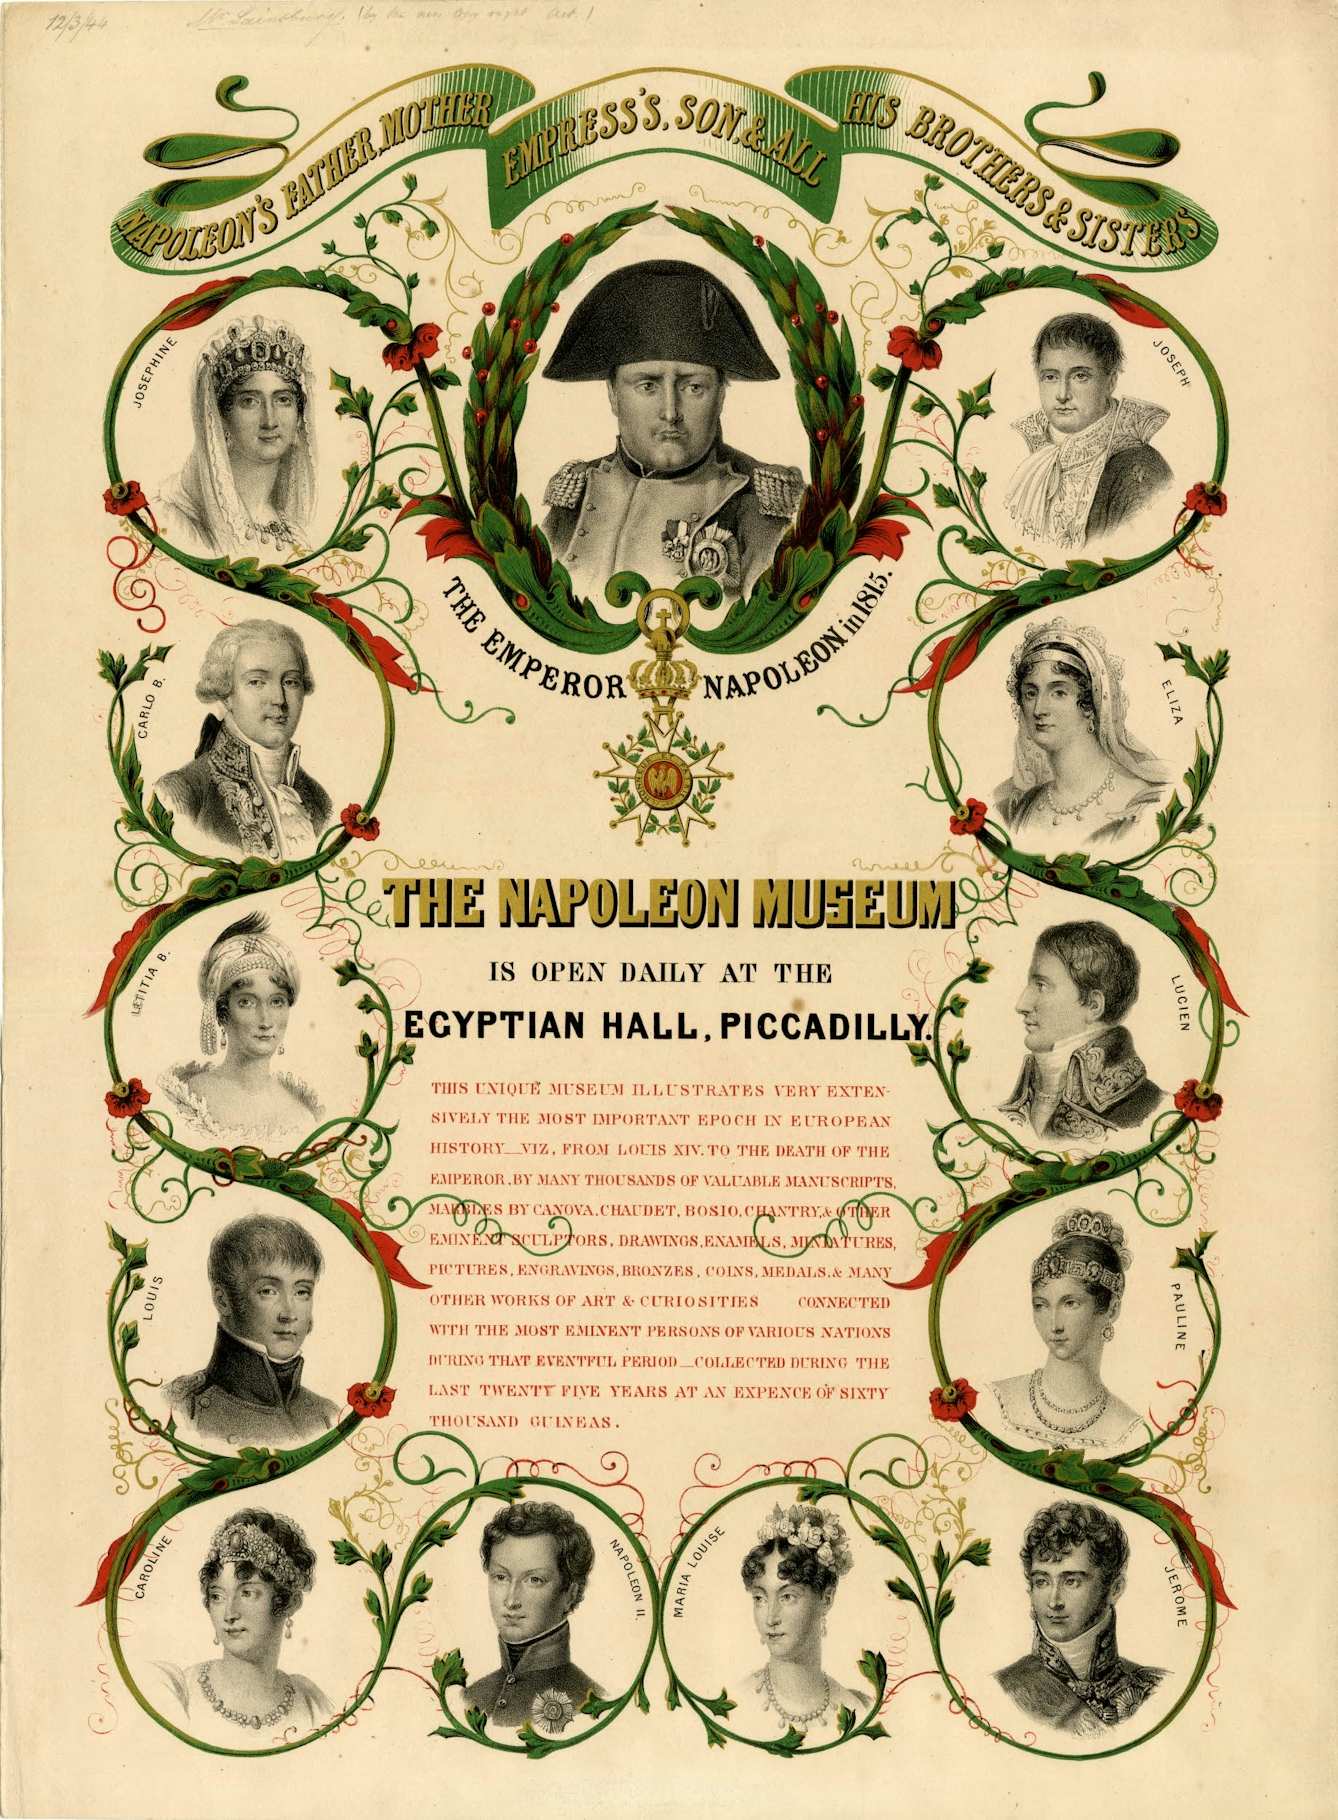 A colour poster advertising the Napoleon Museum.